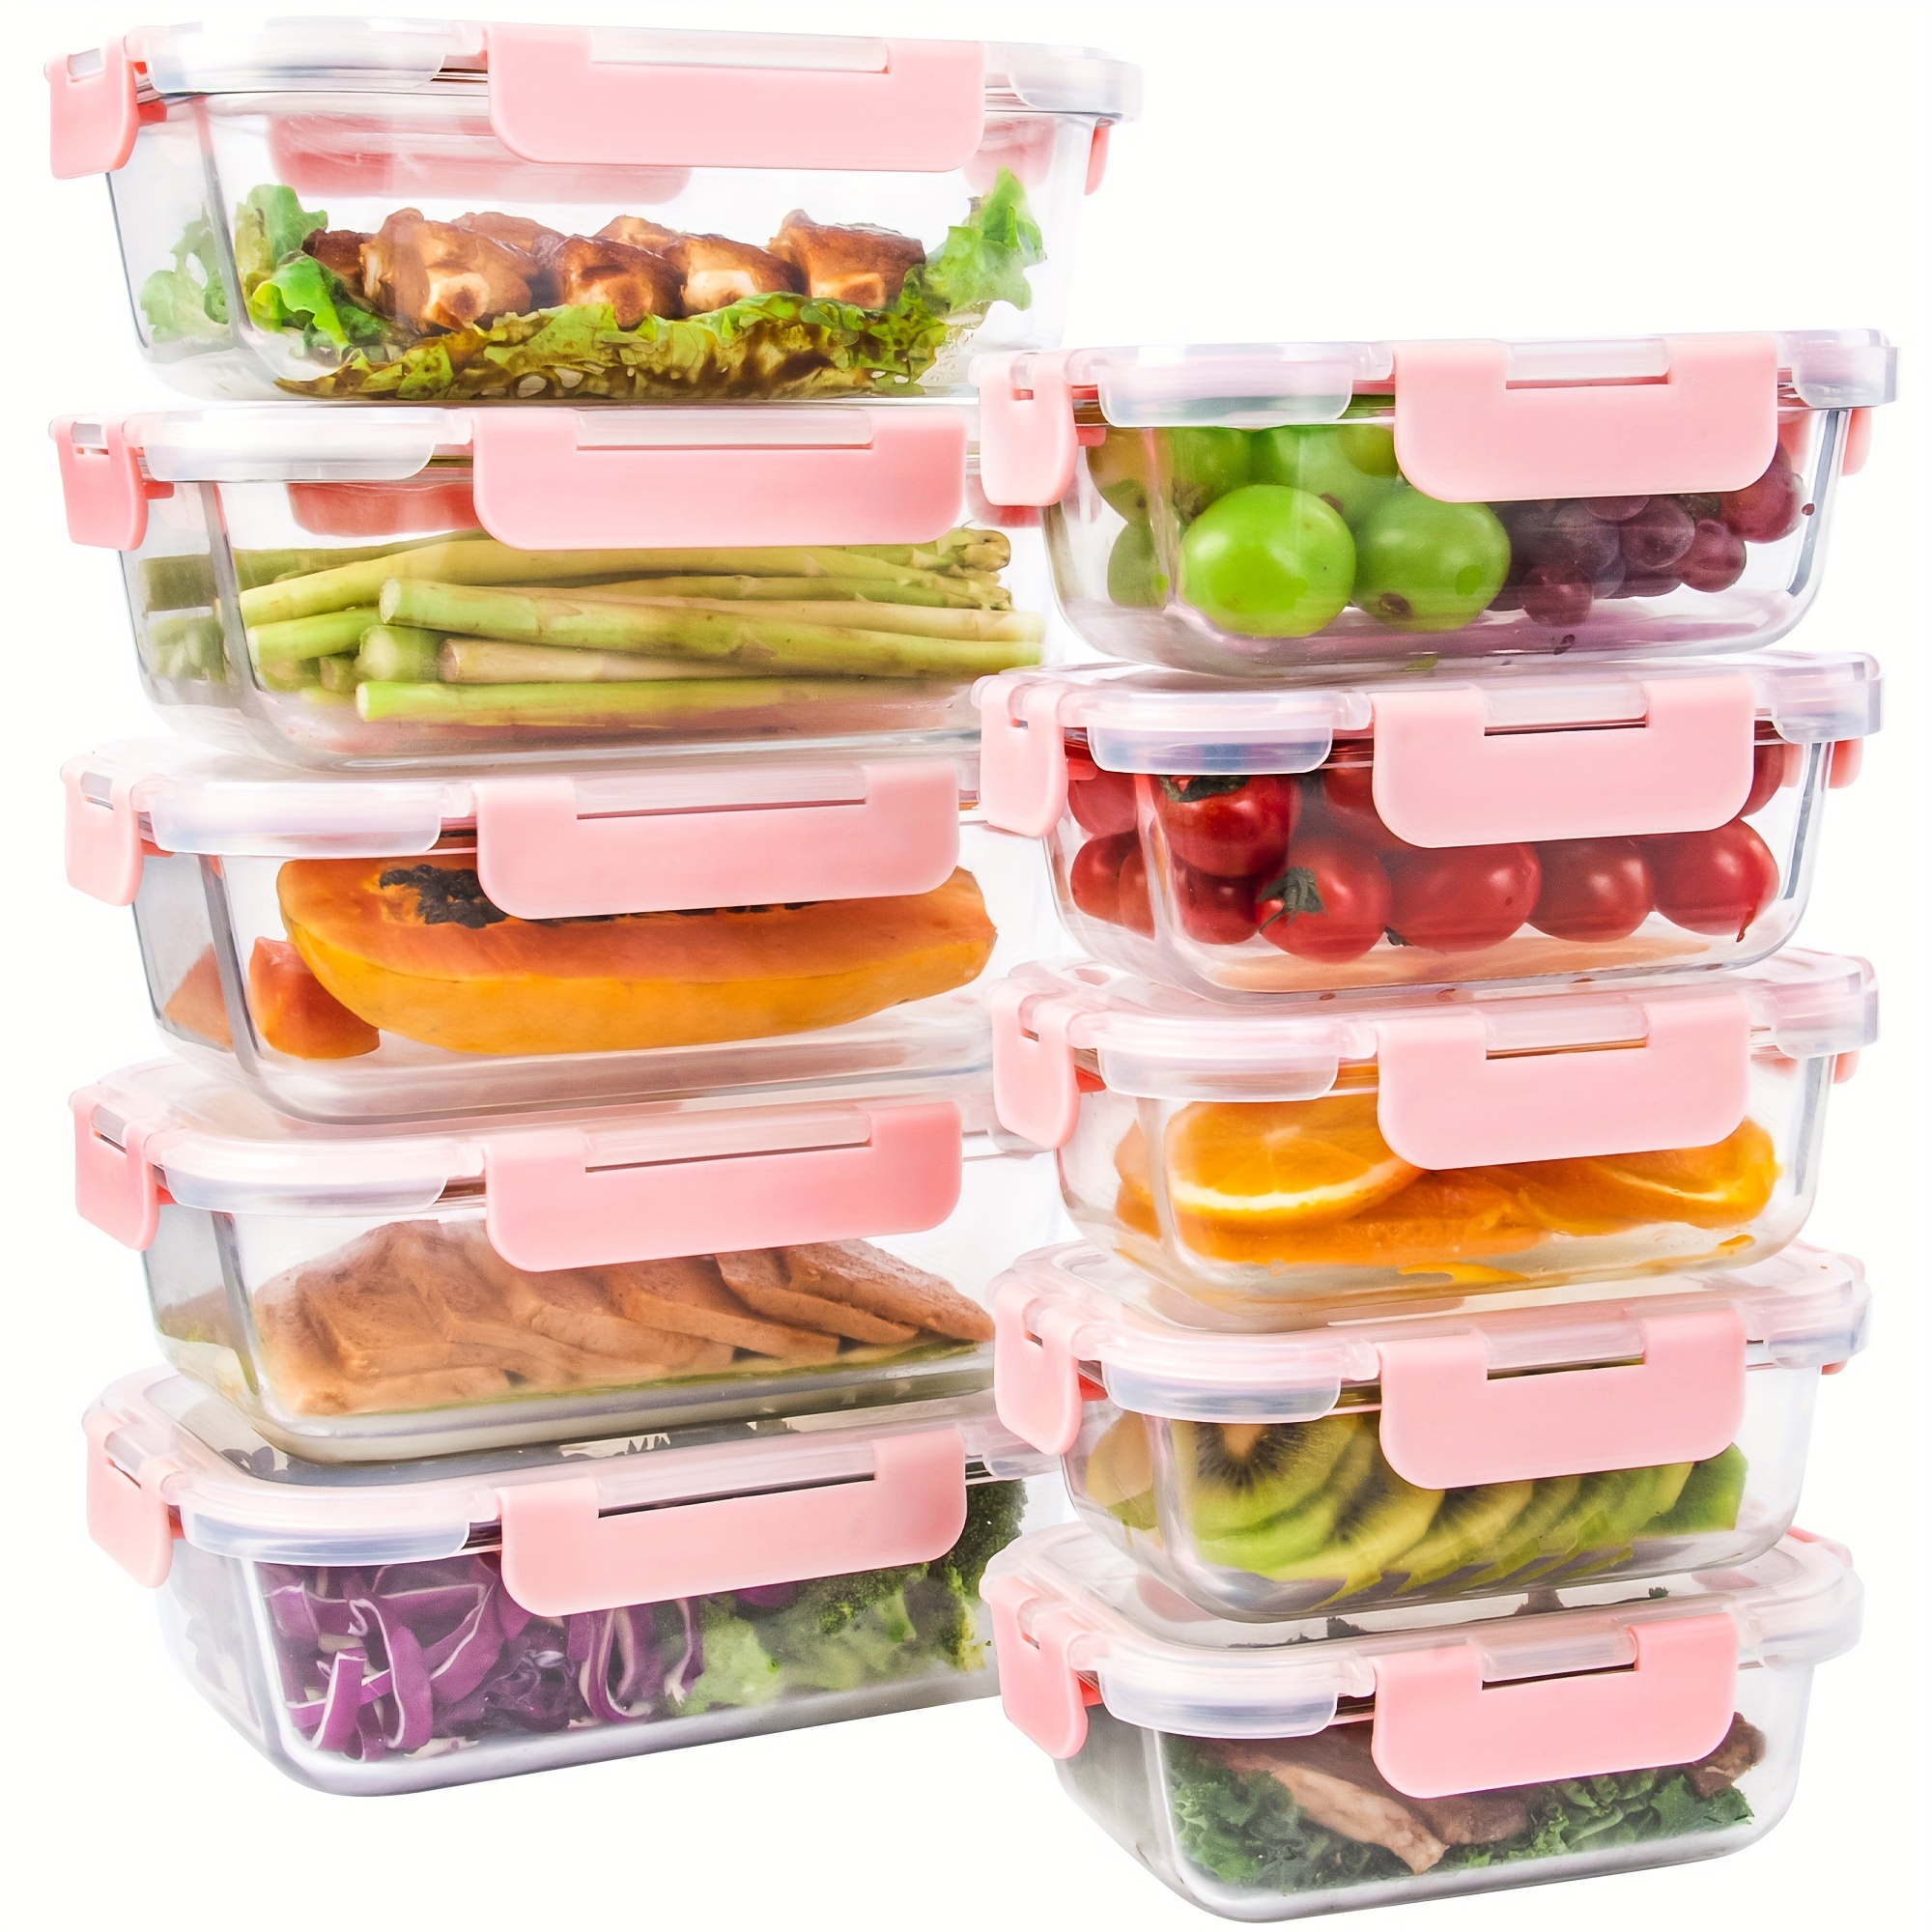 

20 Pcs Glass Meal Prep Containers, High Borosilicate Glass Food Storage Containers With Lids Airtight, Glass Lunch Boxes, Microwave, Freezer And Dishwasher Safe